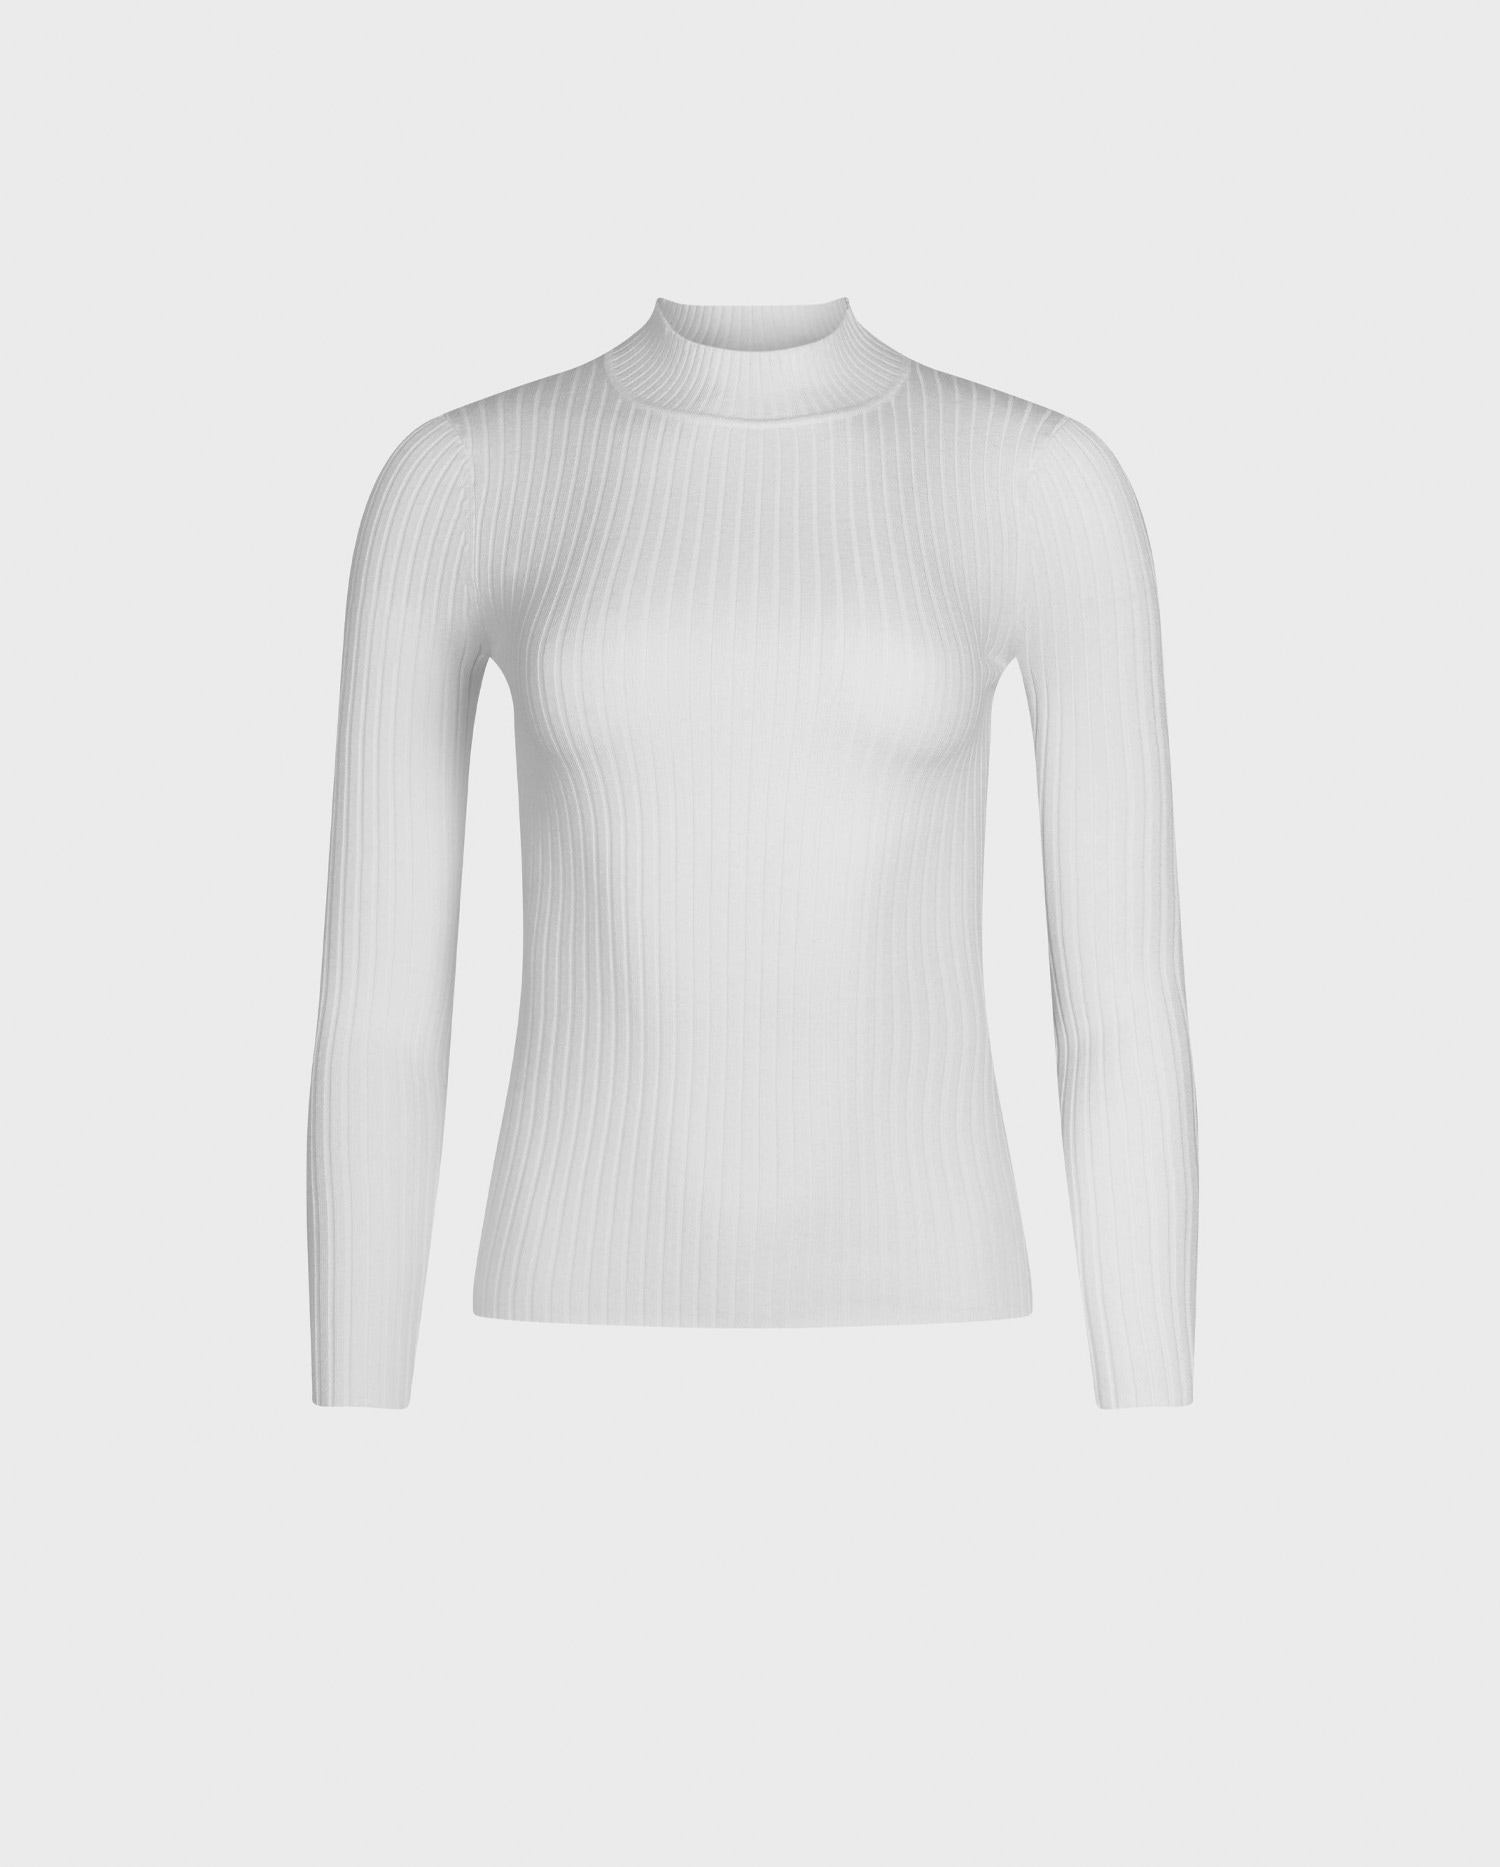 Discover the CARNET mock neck ribbed top from ANNE FONTAINE